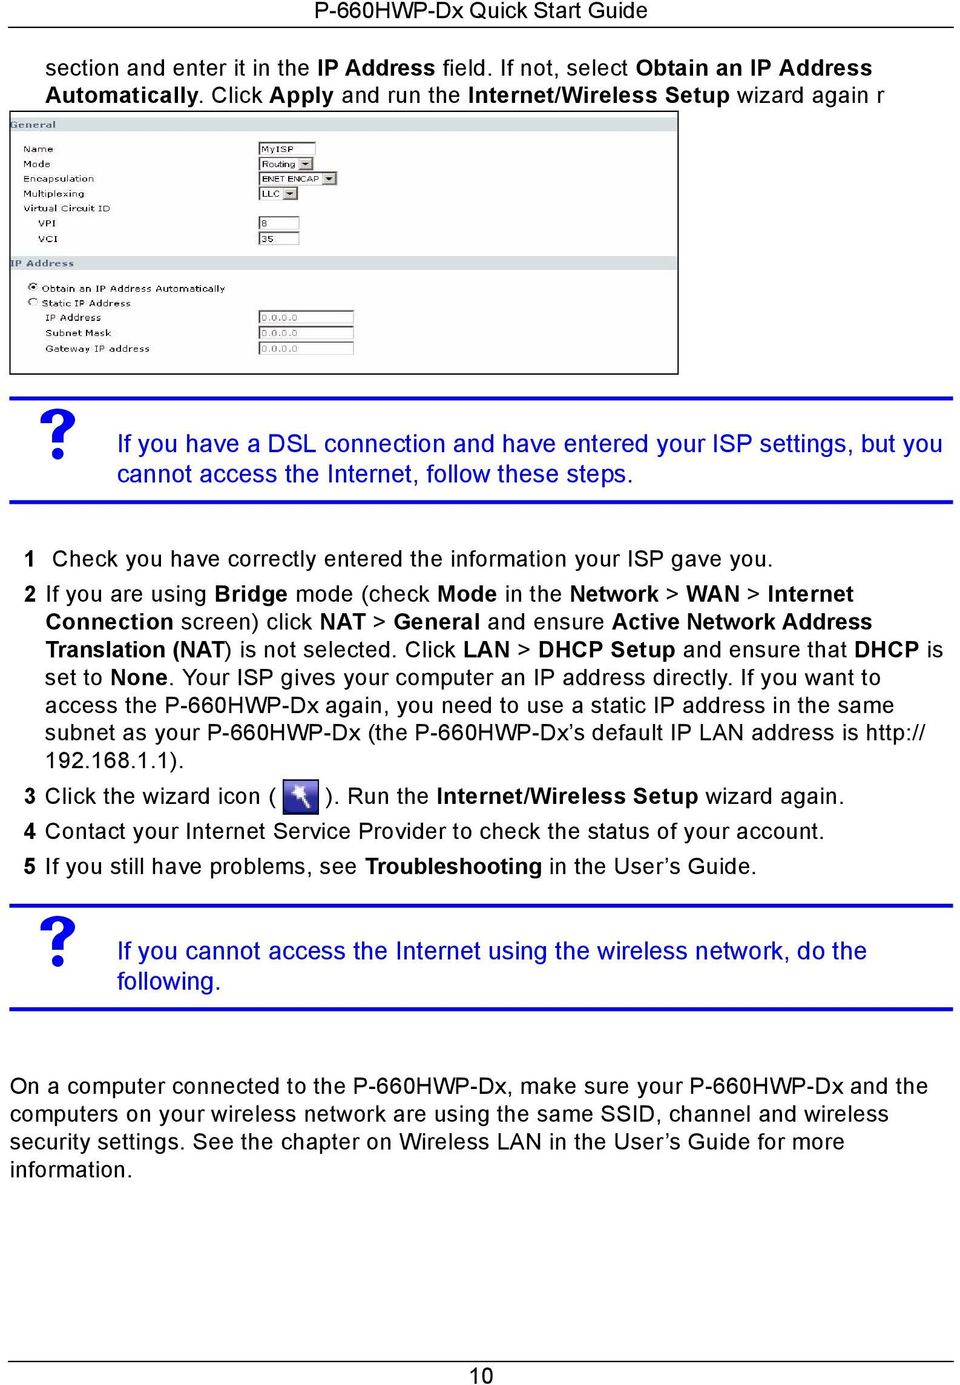 1 Check you have correctly entered the information your ISP gave you.